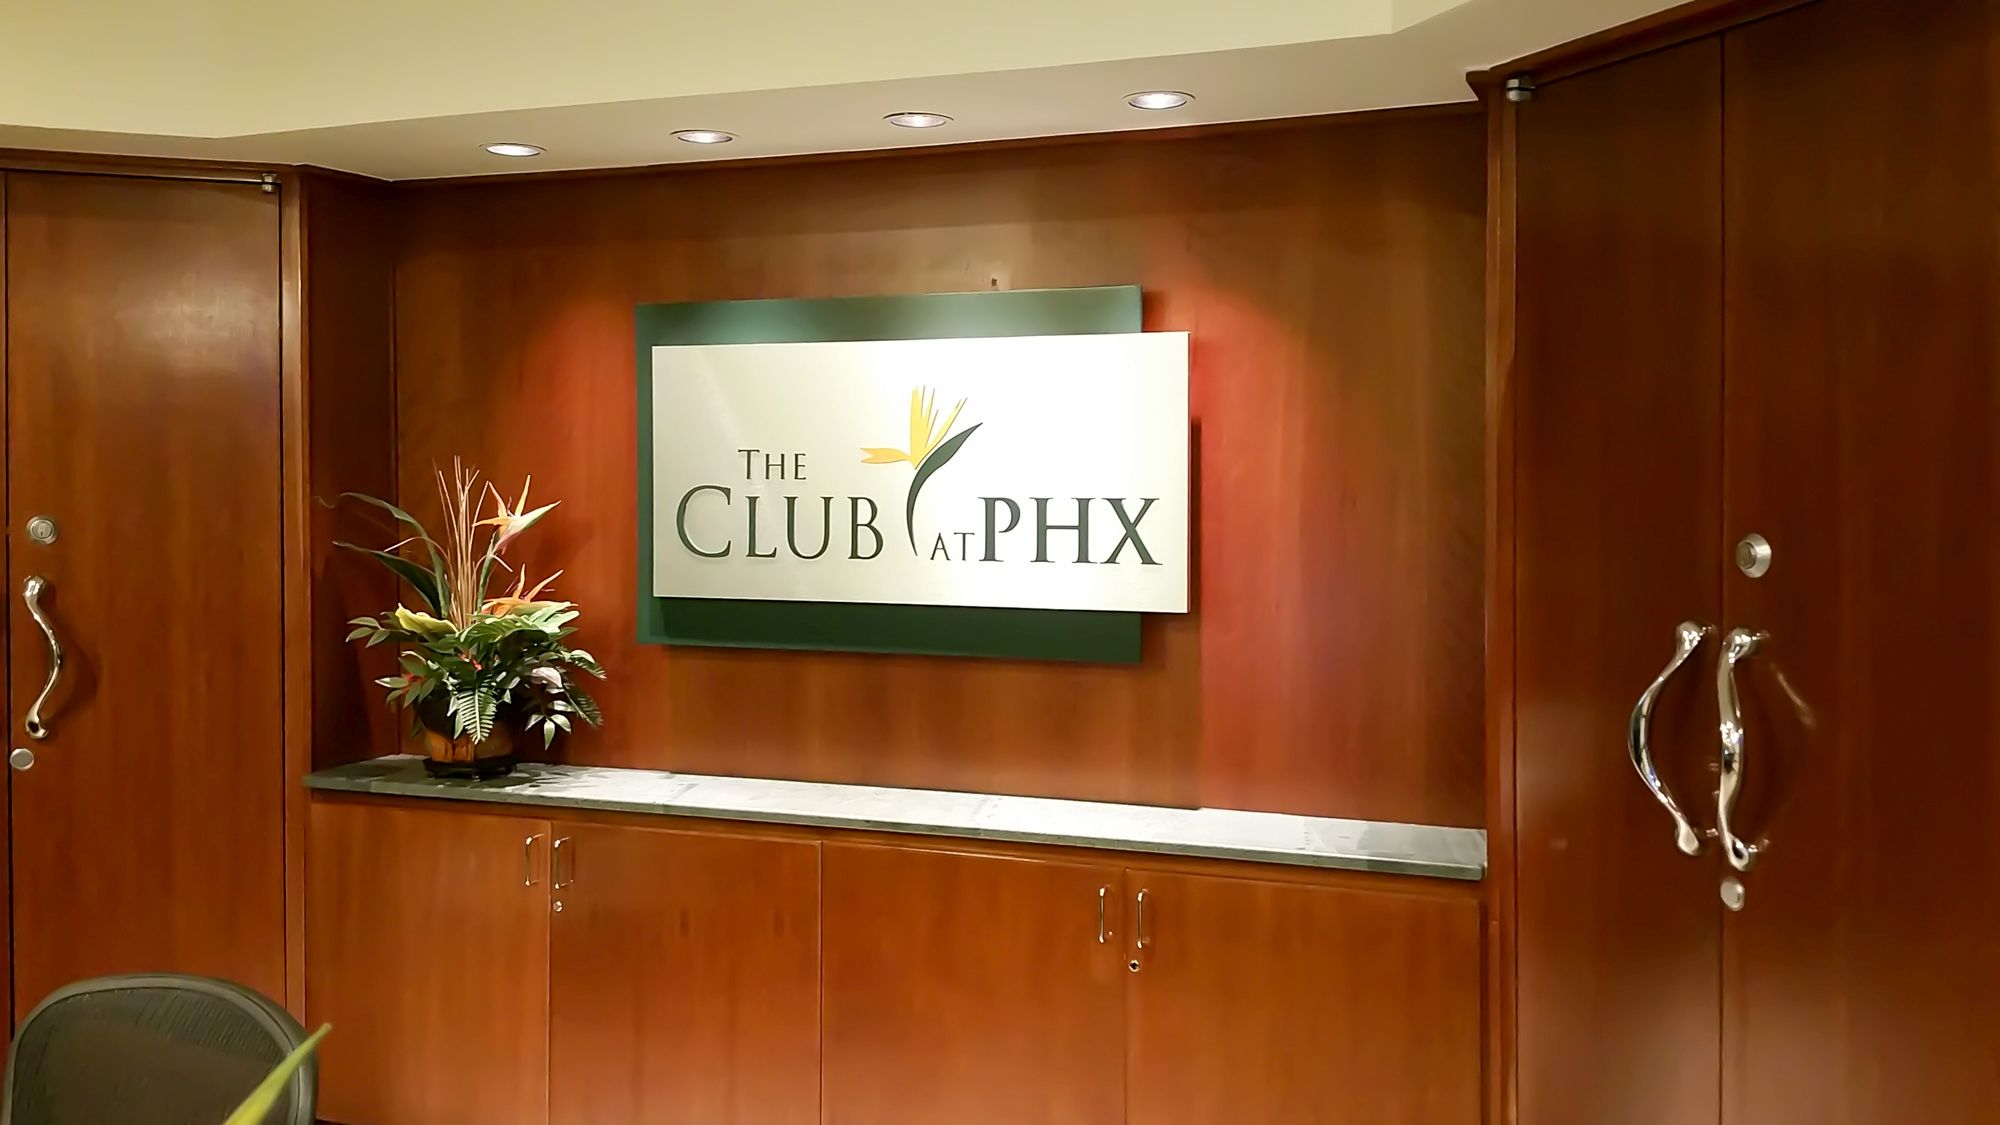 The Club at PHX